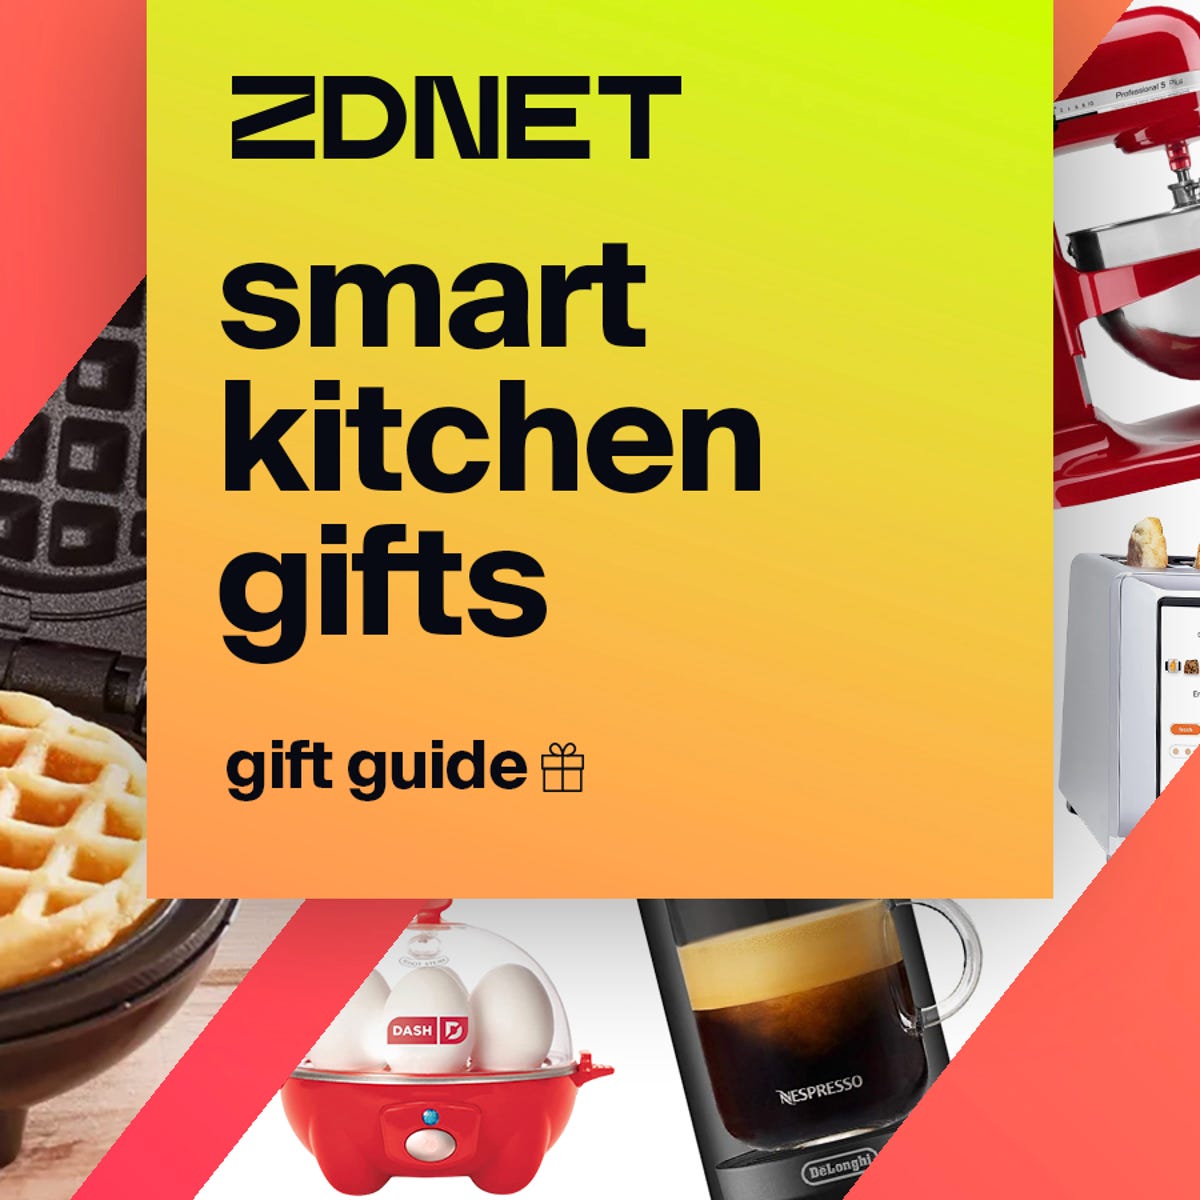 14 kitchen tools from TikTok to gift in 2023